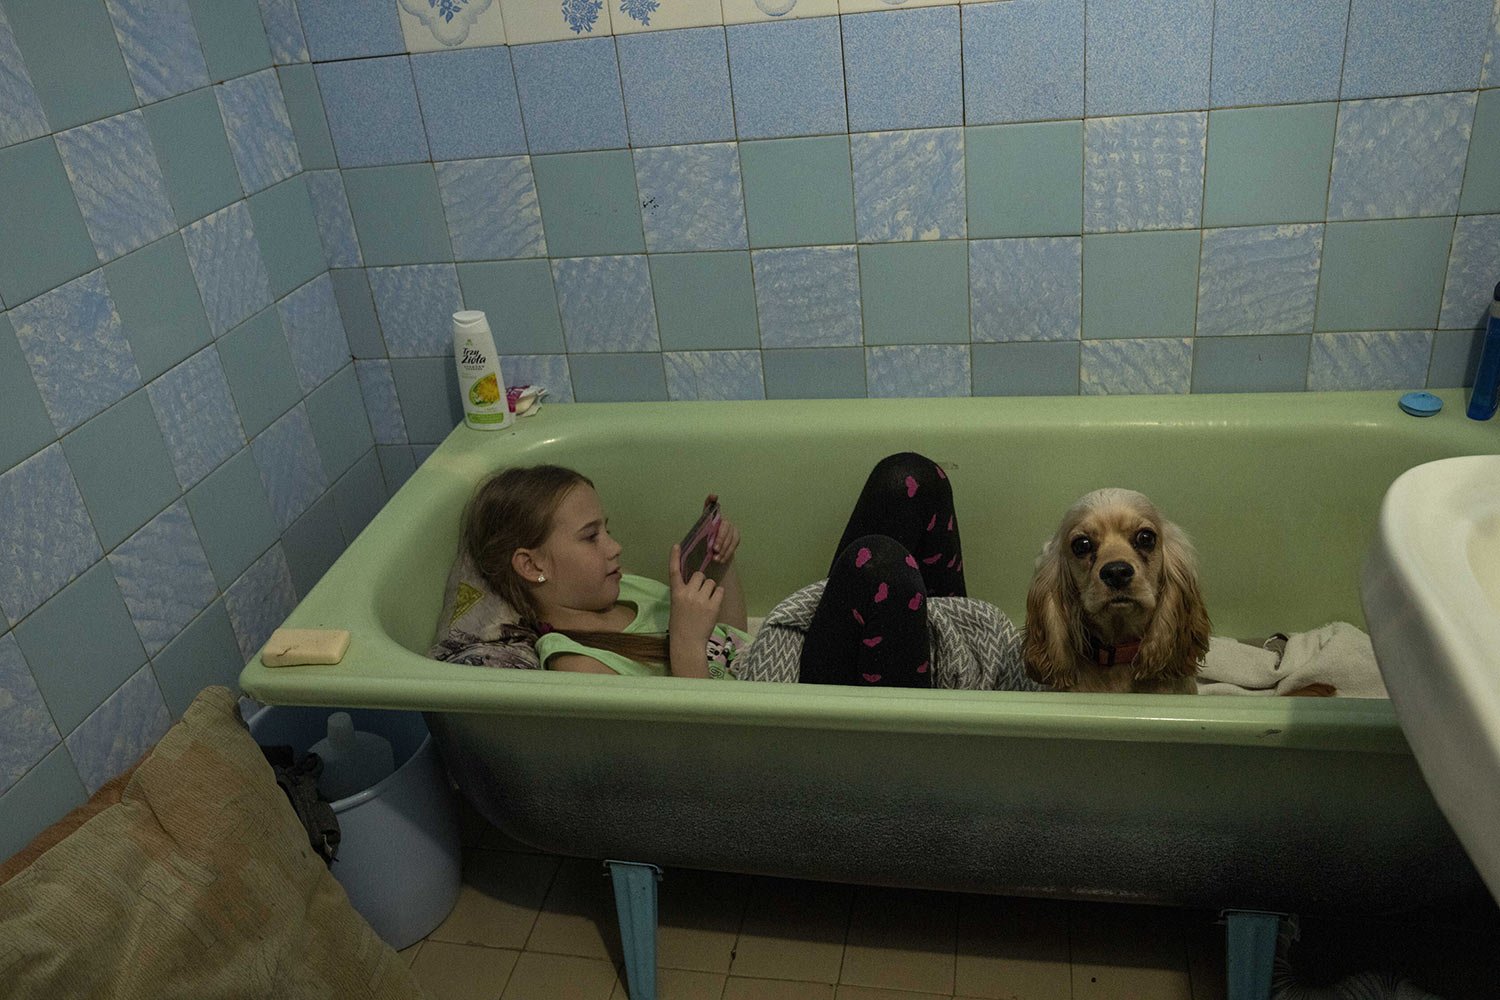  Zlata-Maria Shlapak sits with her puppy Letti in the bathtub while an air siren goes off, at the apartment her family is renting in Lviv where they took refuge in western Ukraine, Saturday, April 2, 2022. (AP Photo/Nariman El-Mofty) 